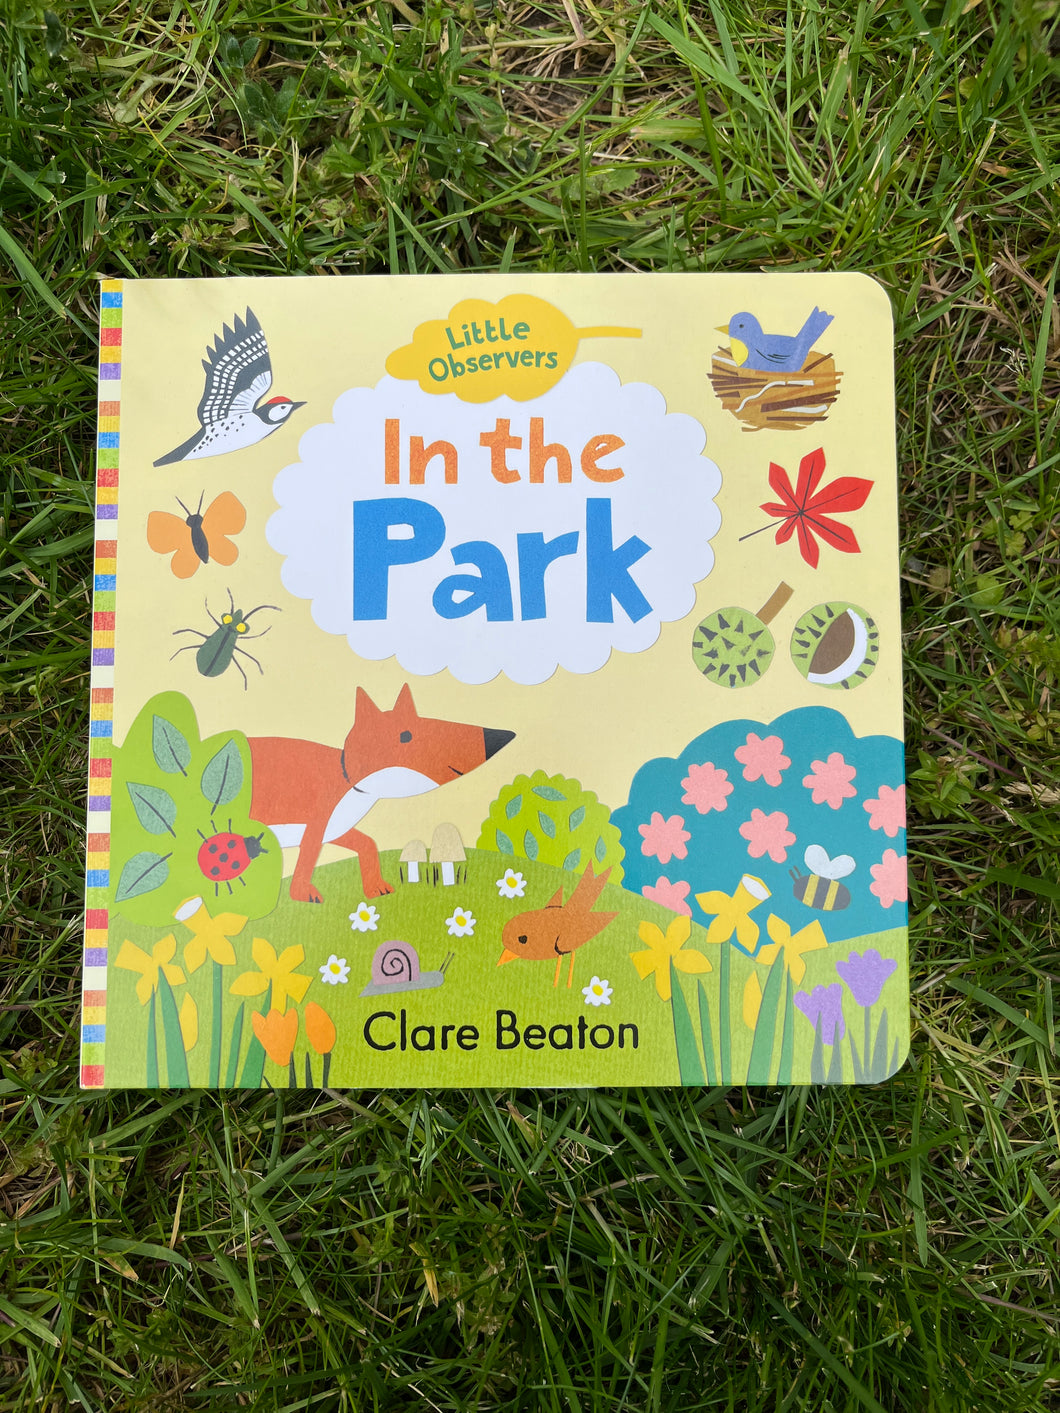 Little Observers in the Park by Clare Beaton